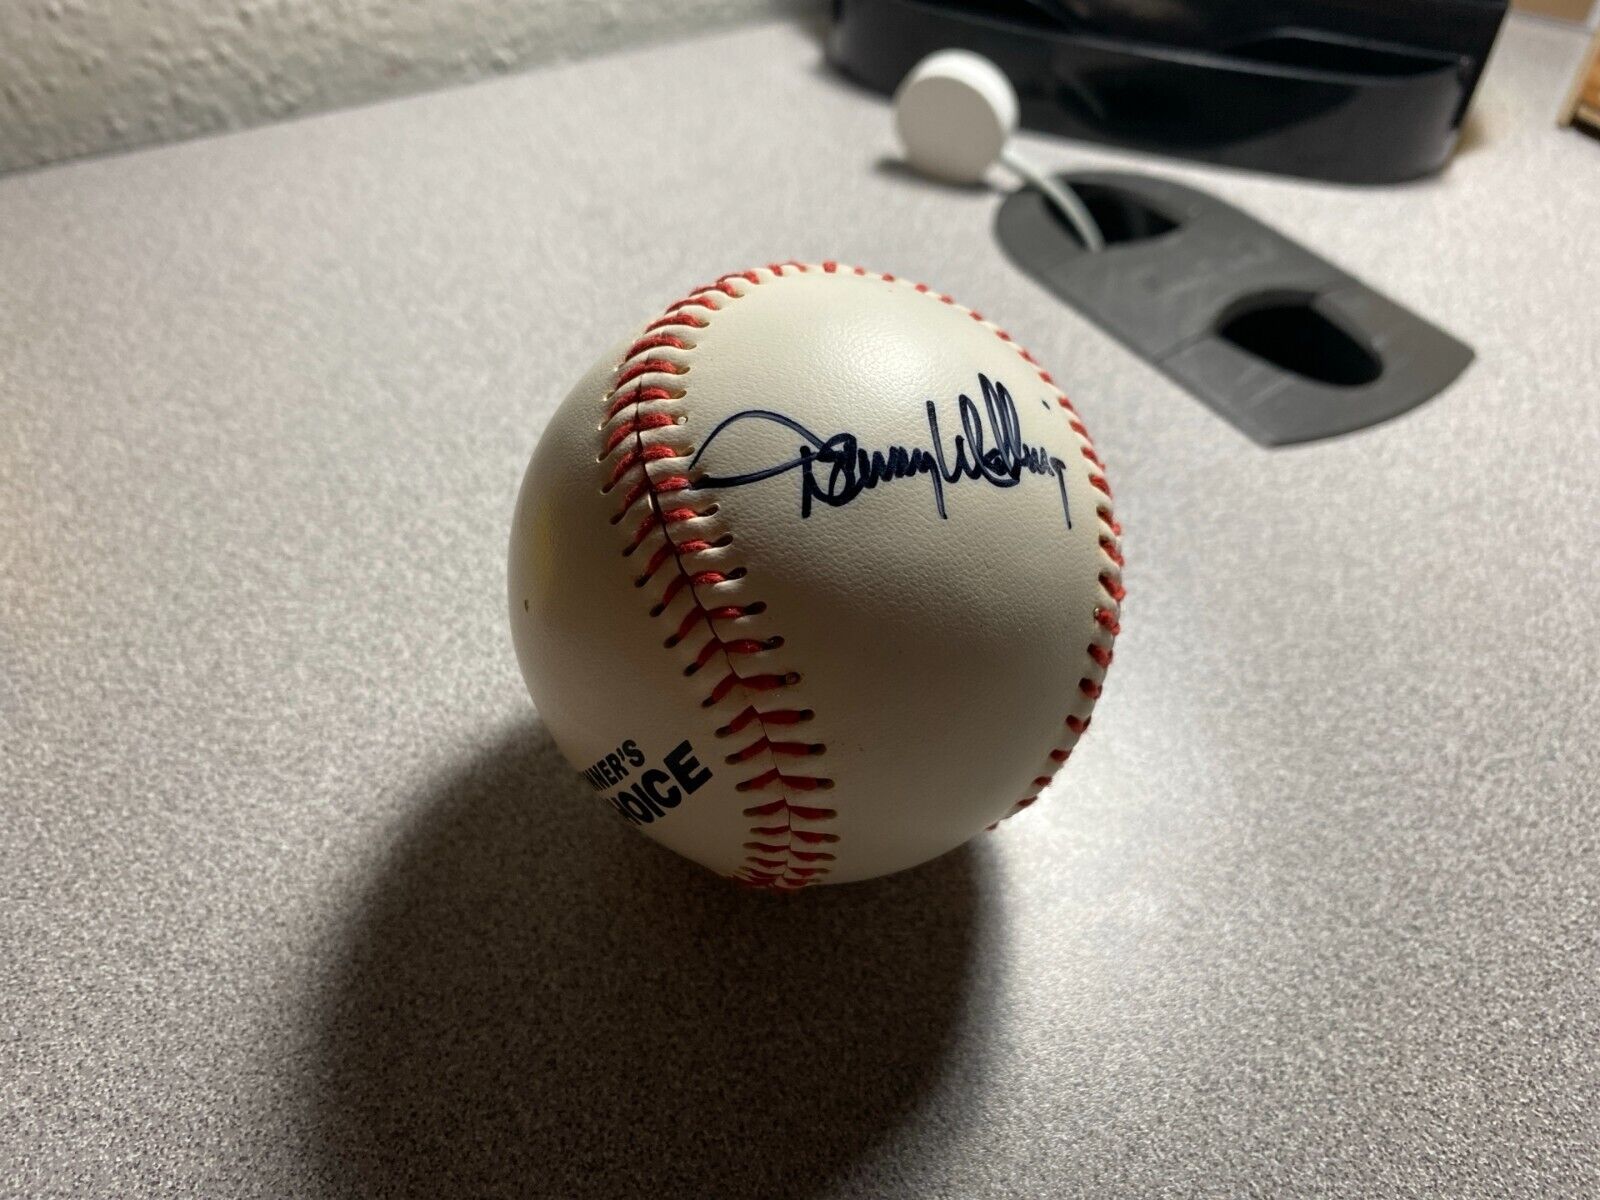 Baseball signed by Houston Astros Player: Denny Walling